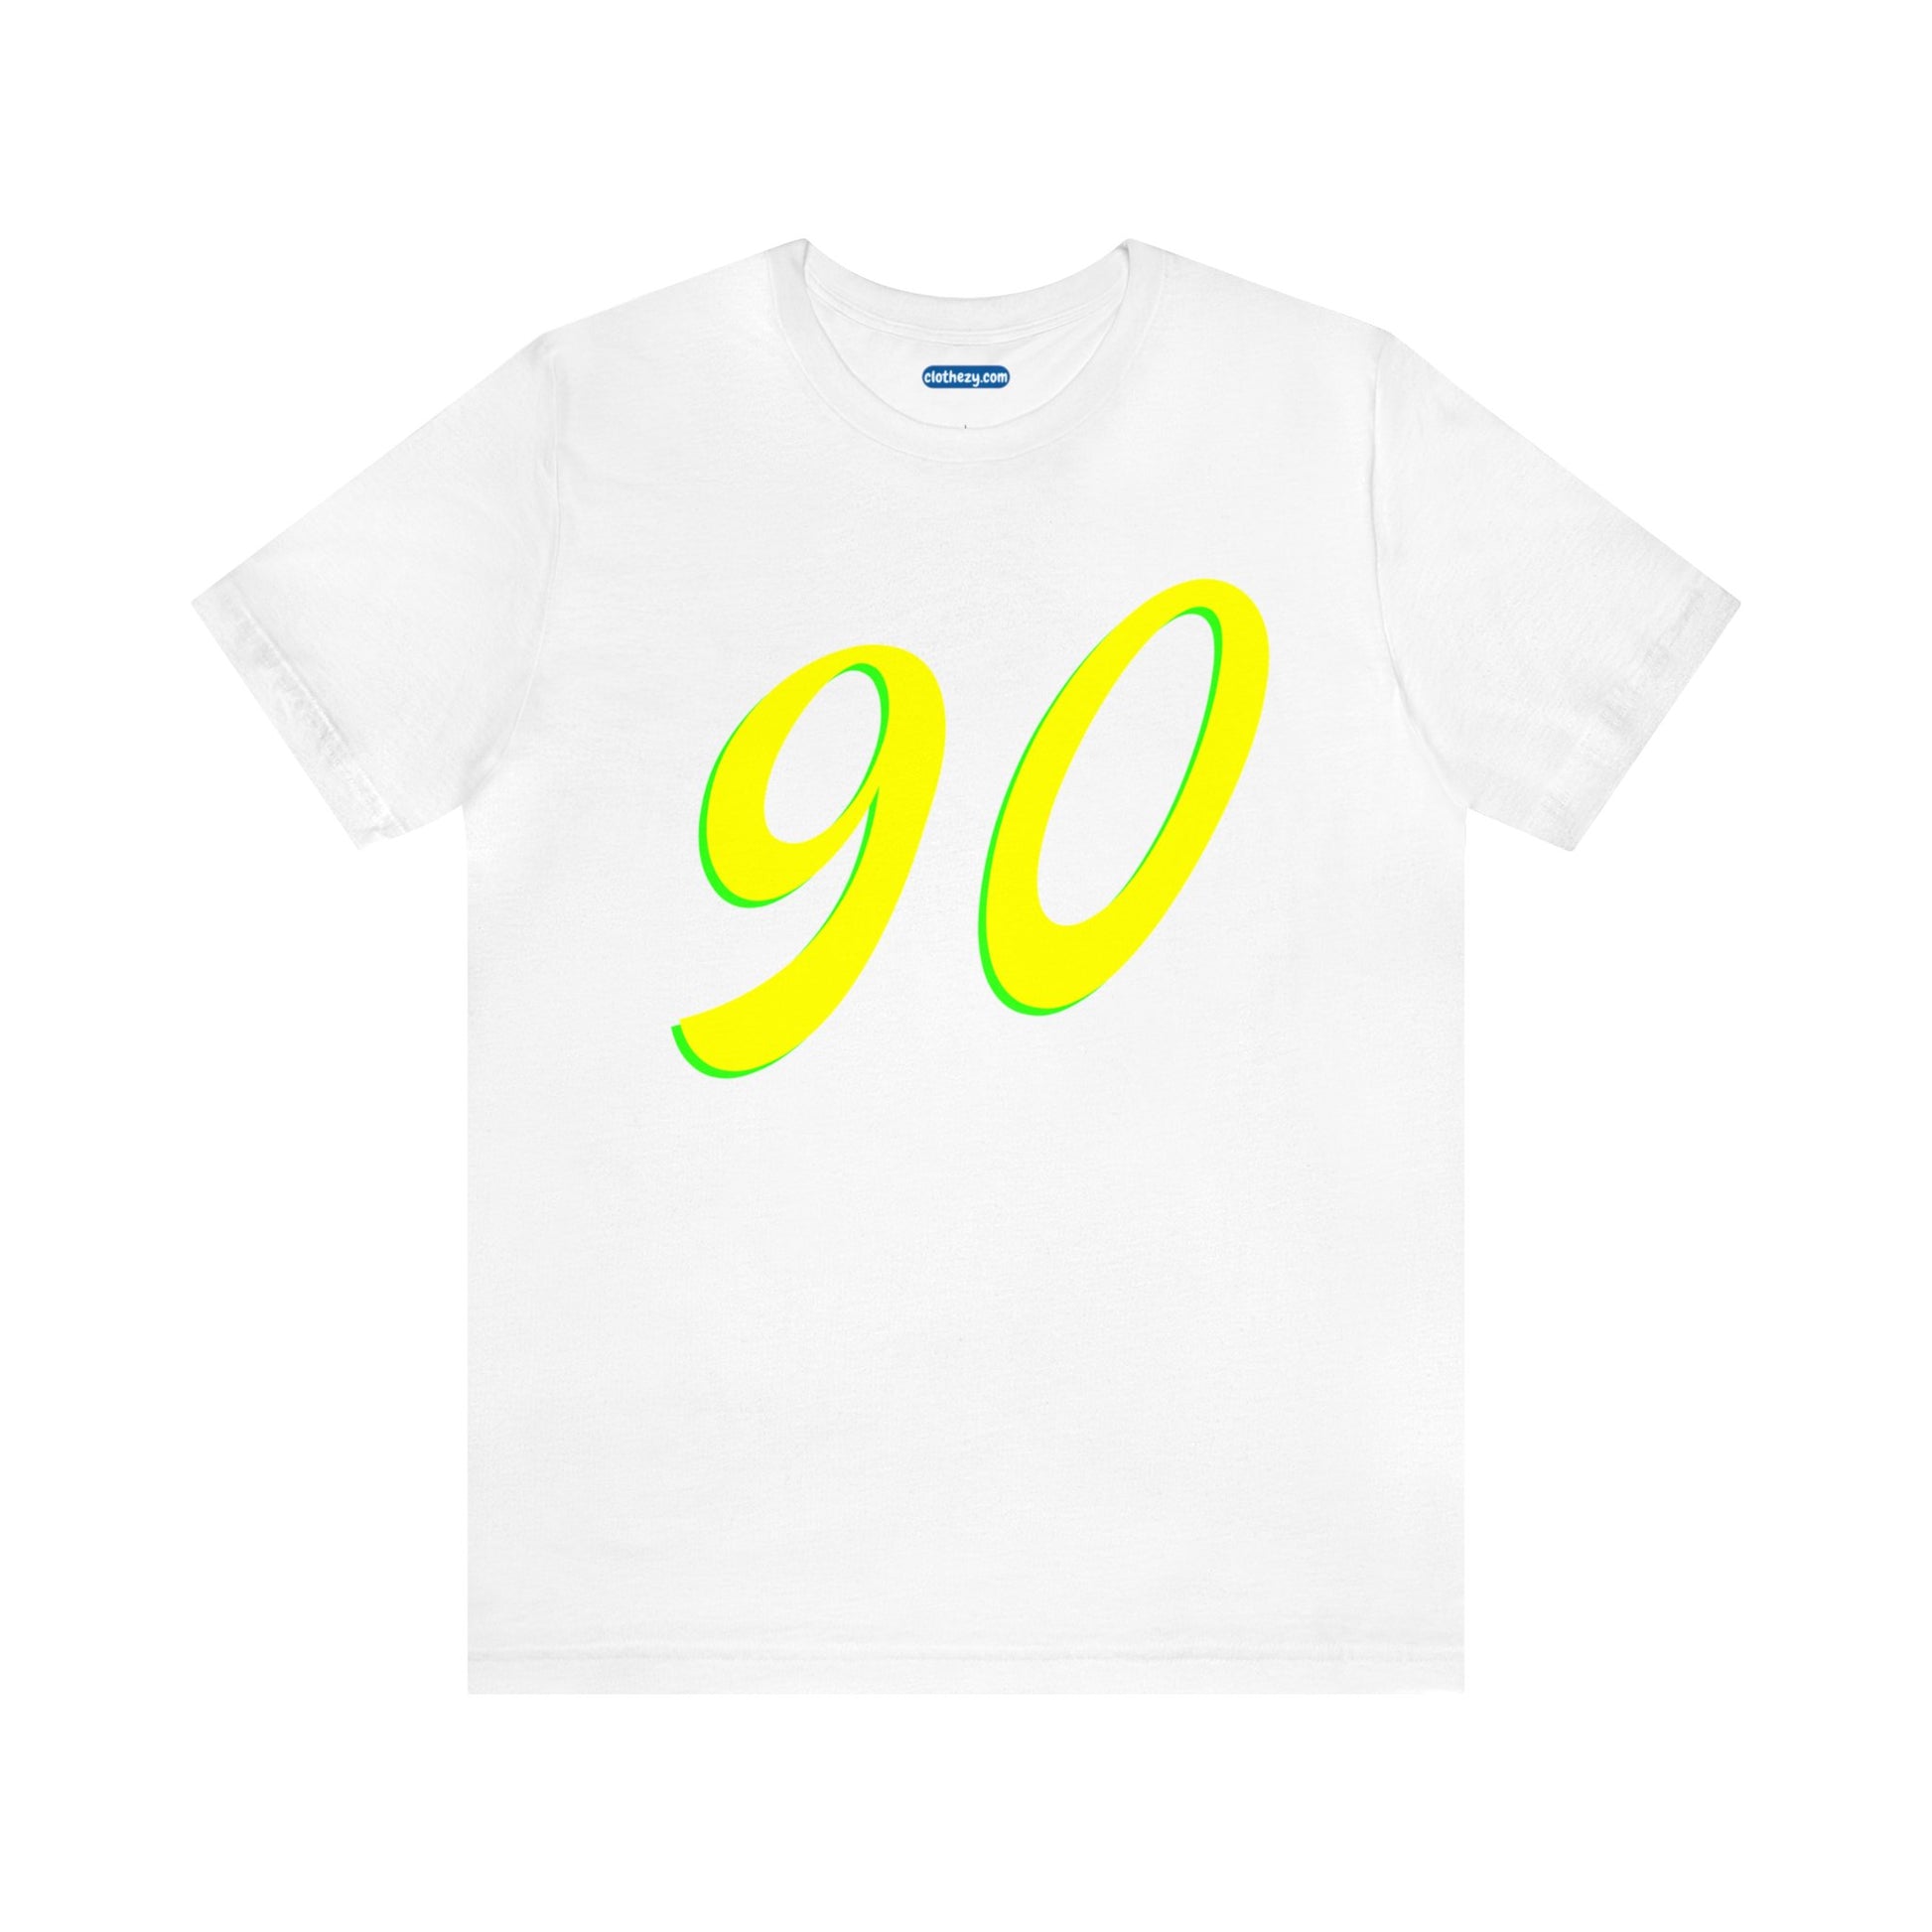 Number 90 Design - Soft Cotton Tee for birthdays and celebrations, Gift for friends and family, Multiple Options by clothezy.com in White Size Small - Buy Now